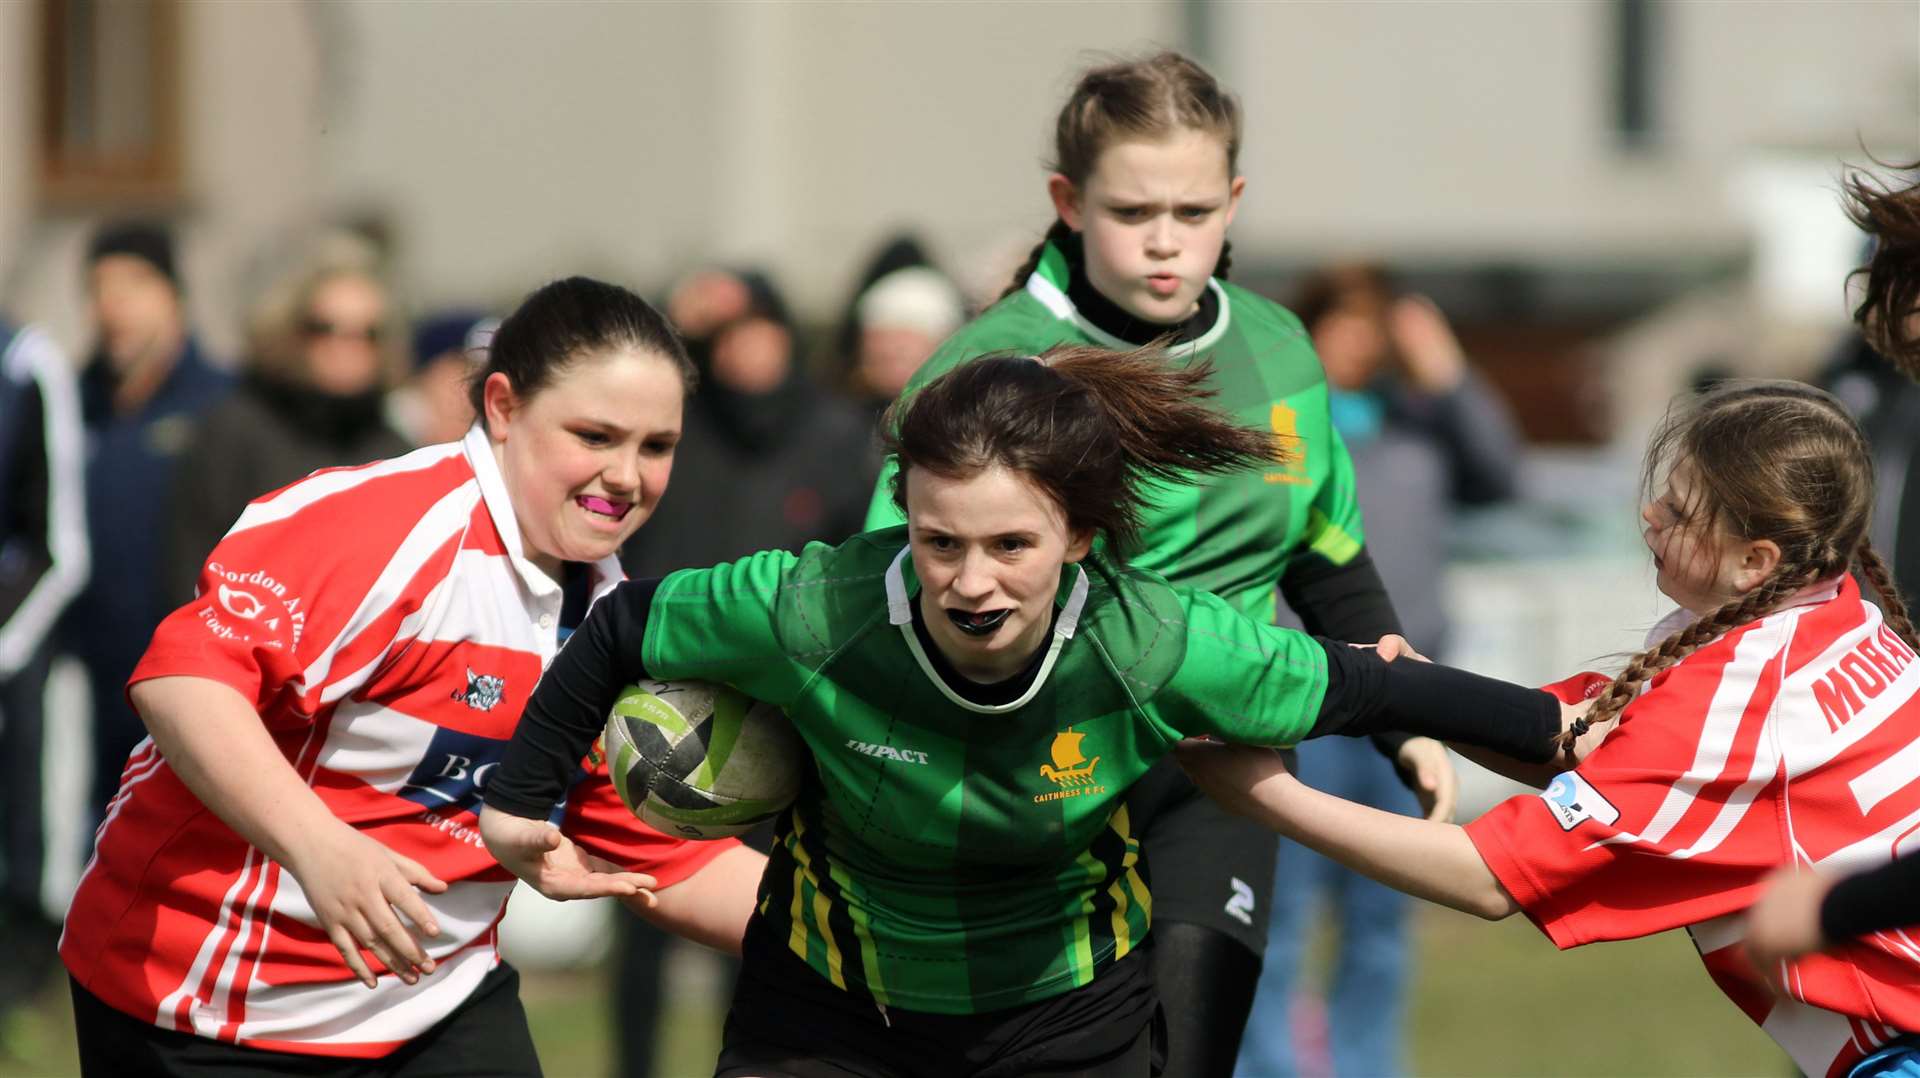 Chloe Miller fends off two defenders en route to scoring one of her three tries in Caithness Girls U15s' National Cup semi-final victory against Grampian.Picture: James Gunn